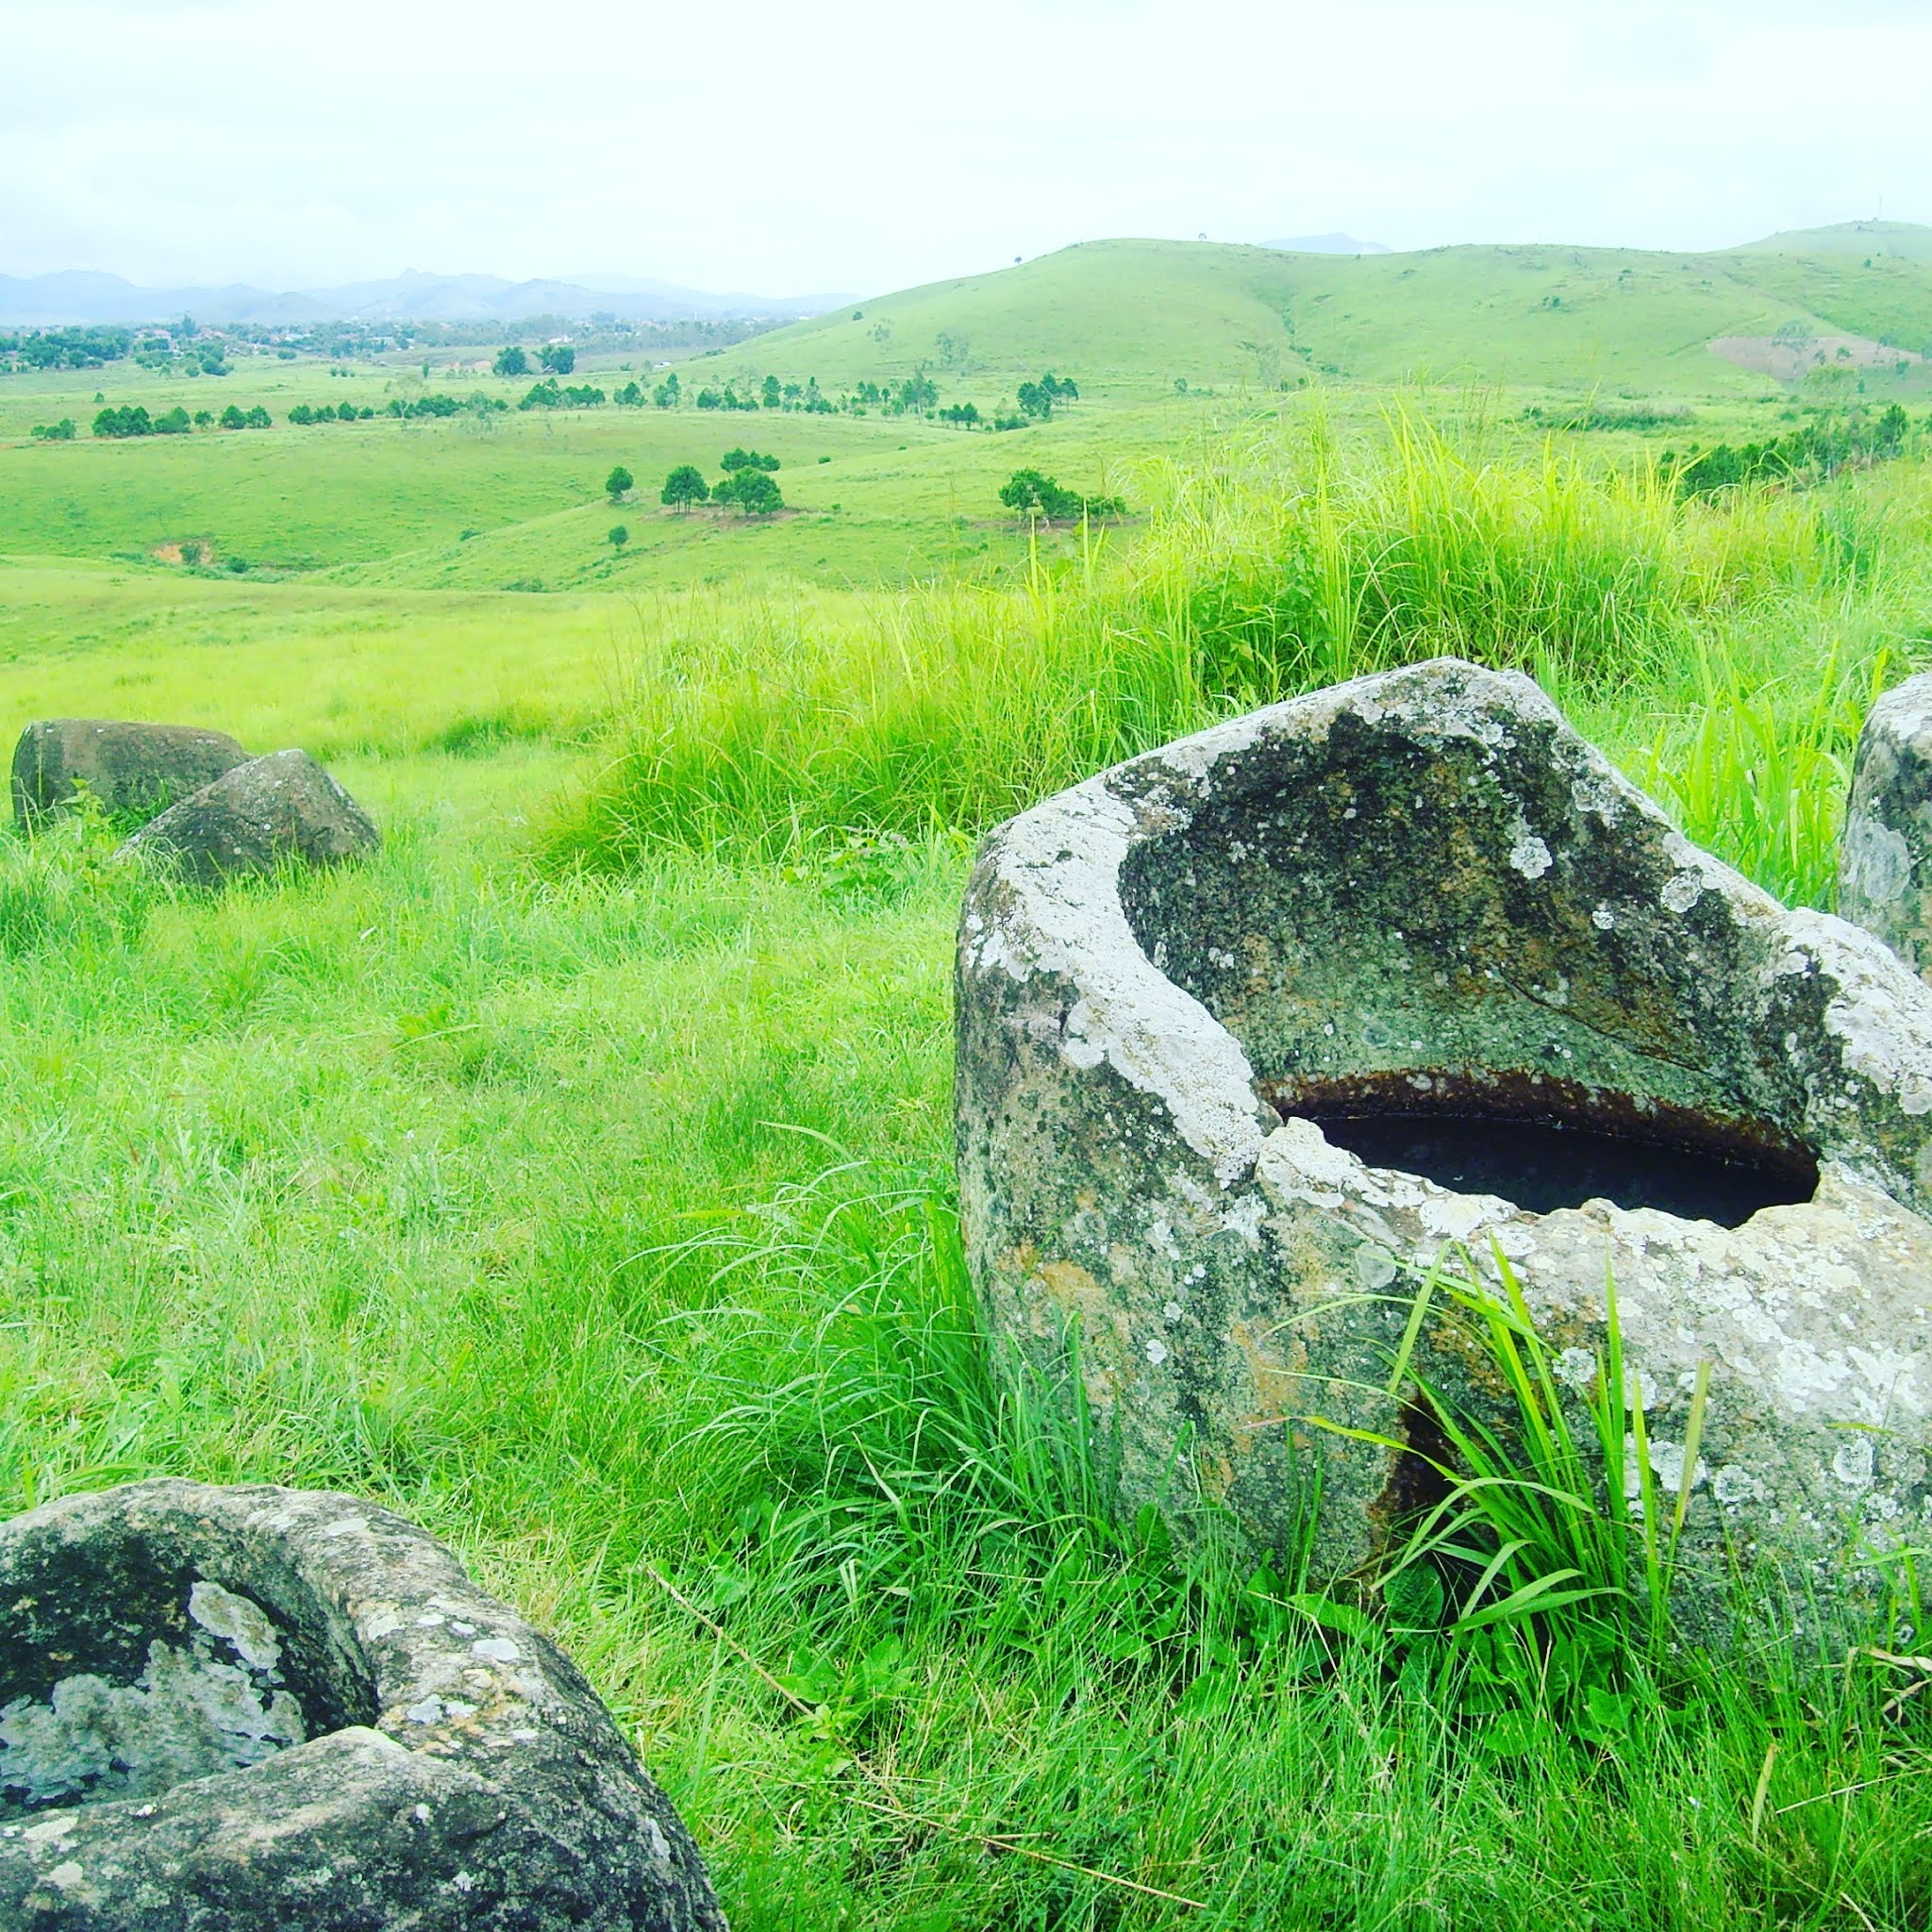 large stone jar in field in phonsavan laos surrounded by grass